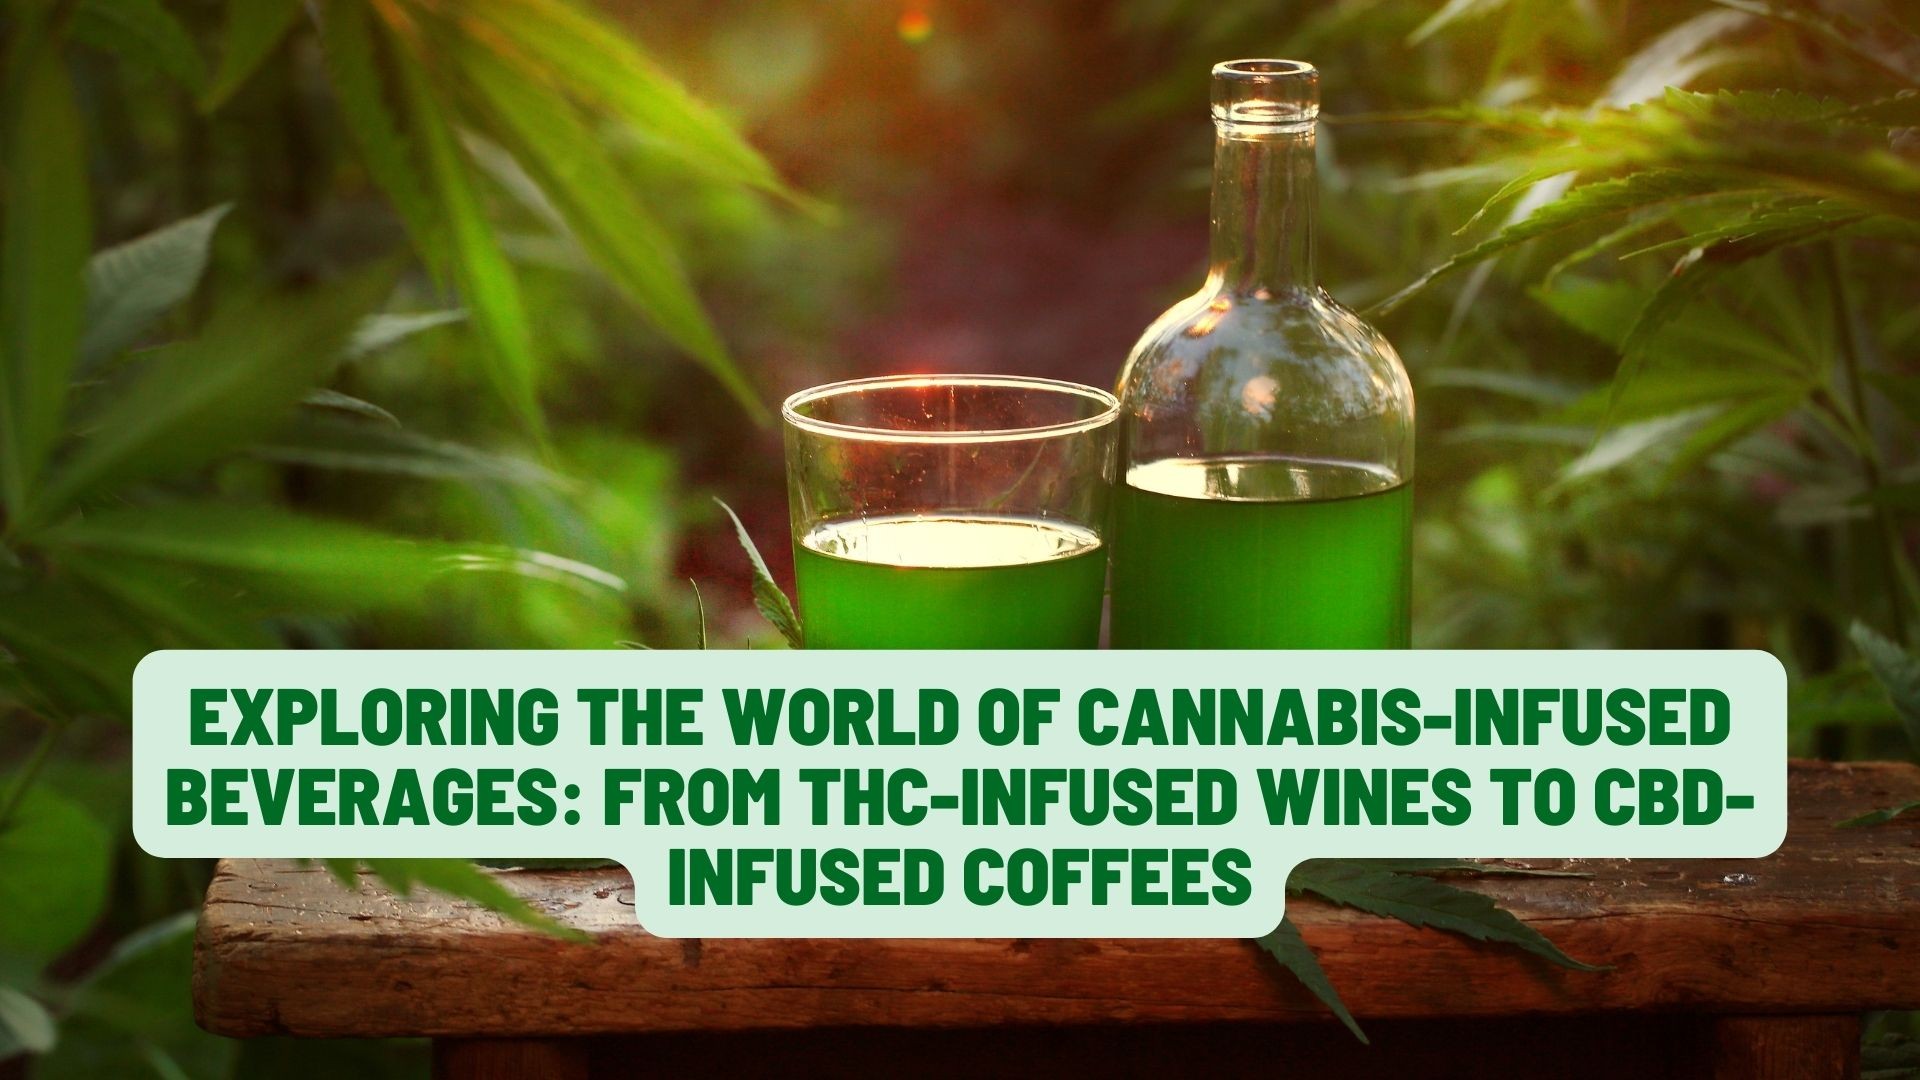 Exploring the World of Cannabis-Infused Beverages: From THC-Infused Wines to CBD-Infused Coffees